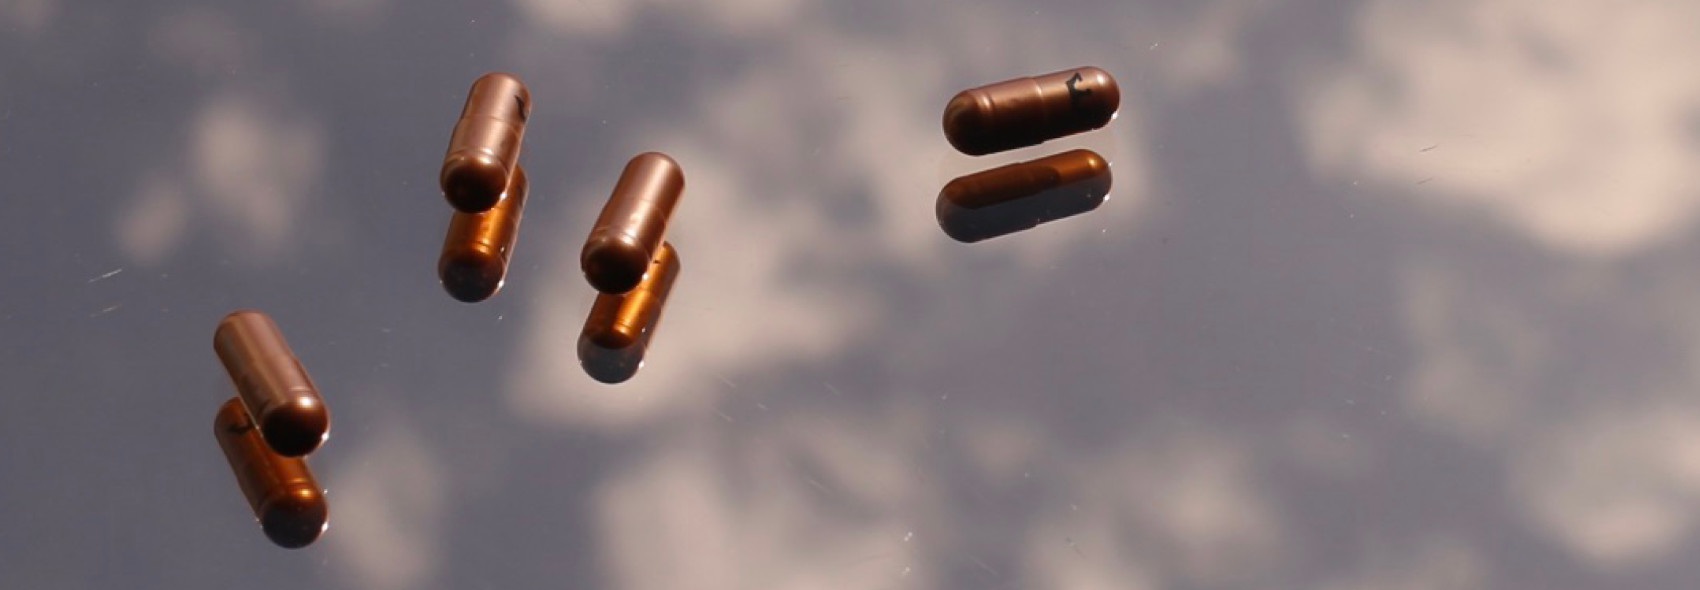 LYMA Supplement capsules on table